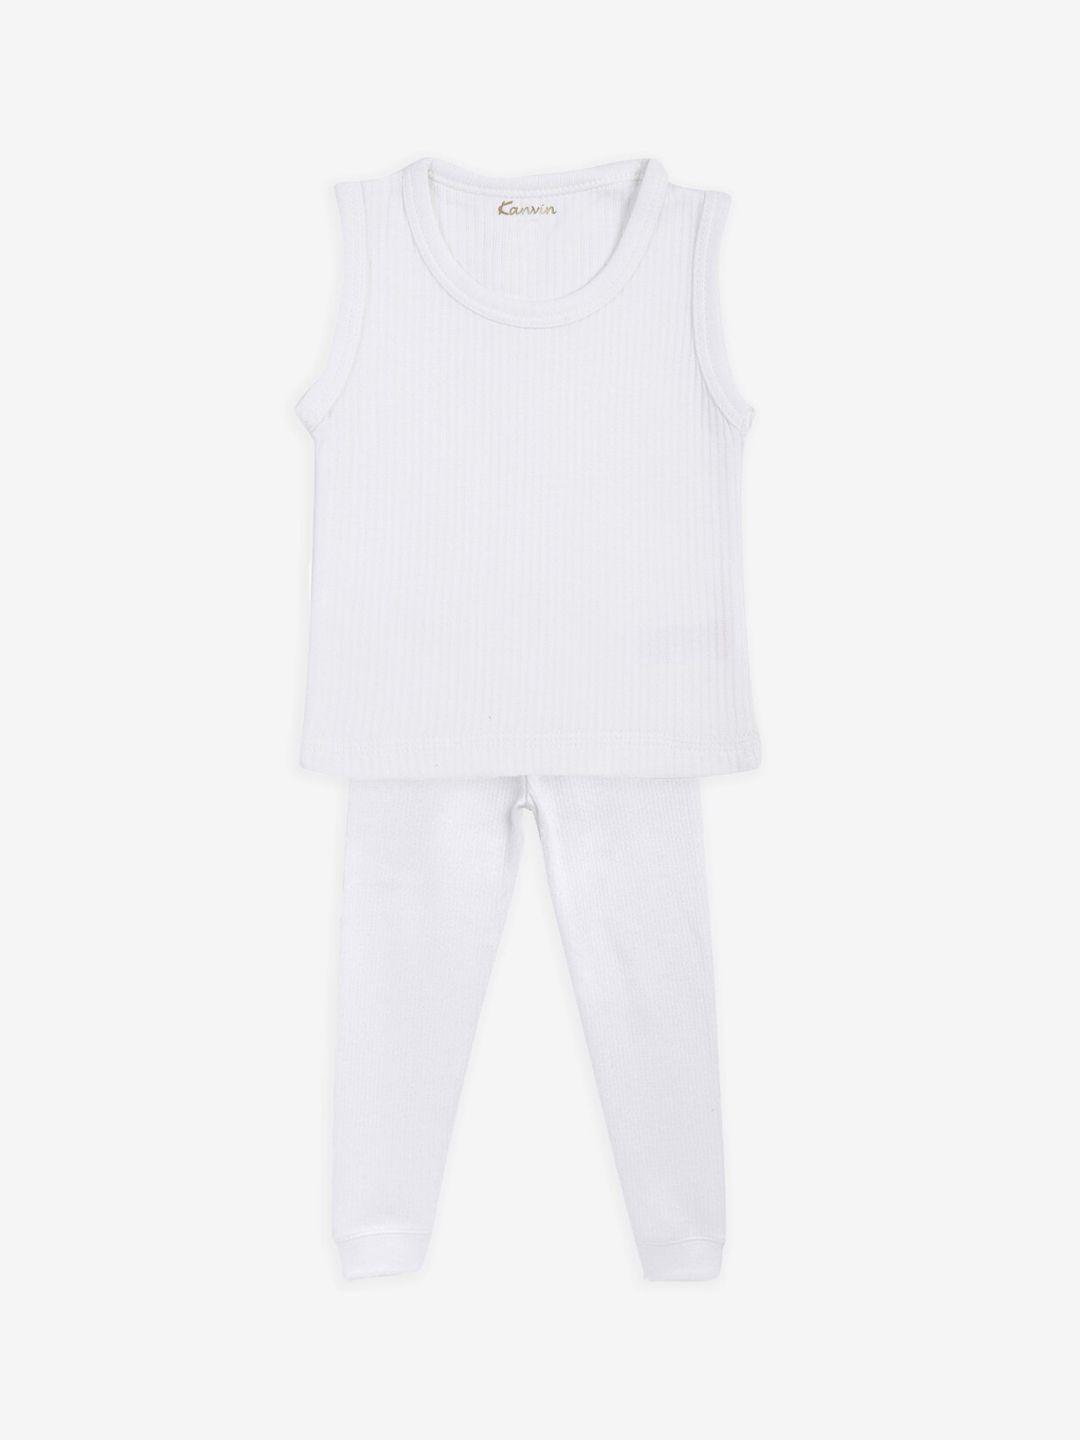 kanvin-boys-white-solid-thermal-set